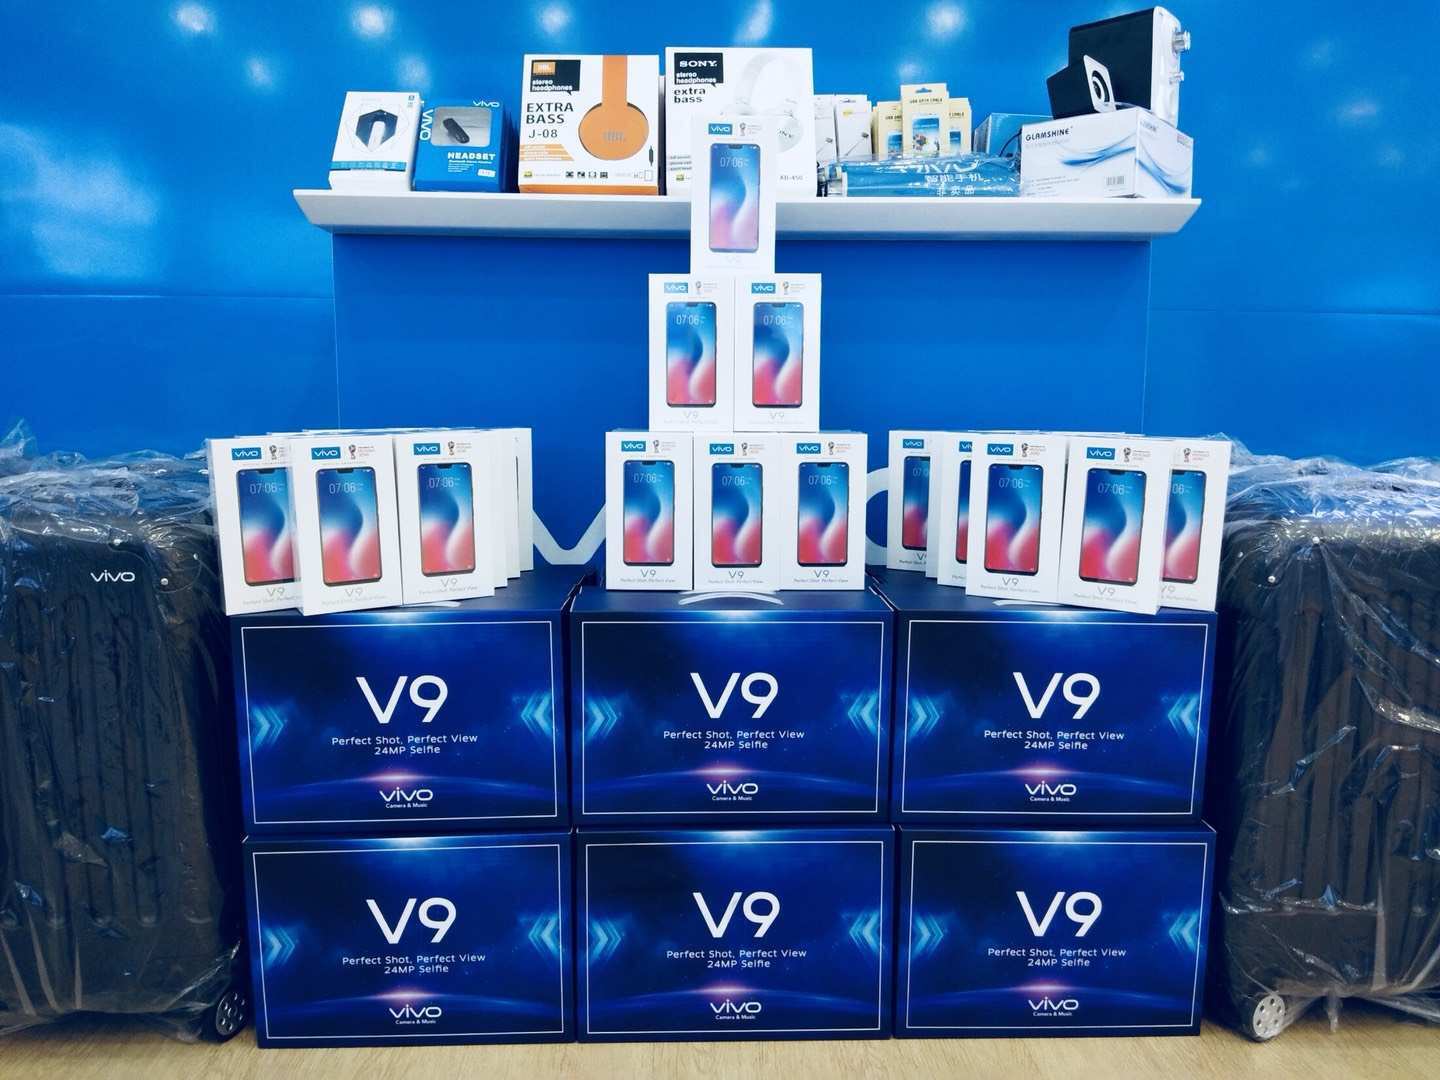 vivo Malaysia still offering a V9 Mystery Deluxe Gift Box plus an additional 6 months warranty gift for each vivo V9 purchase